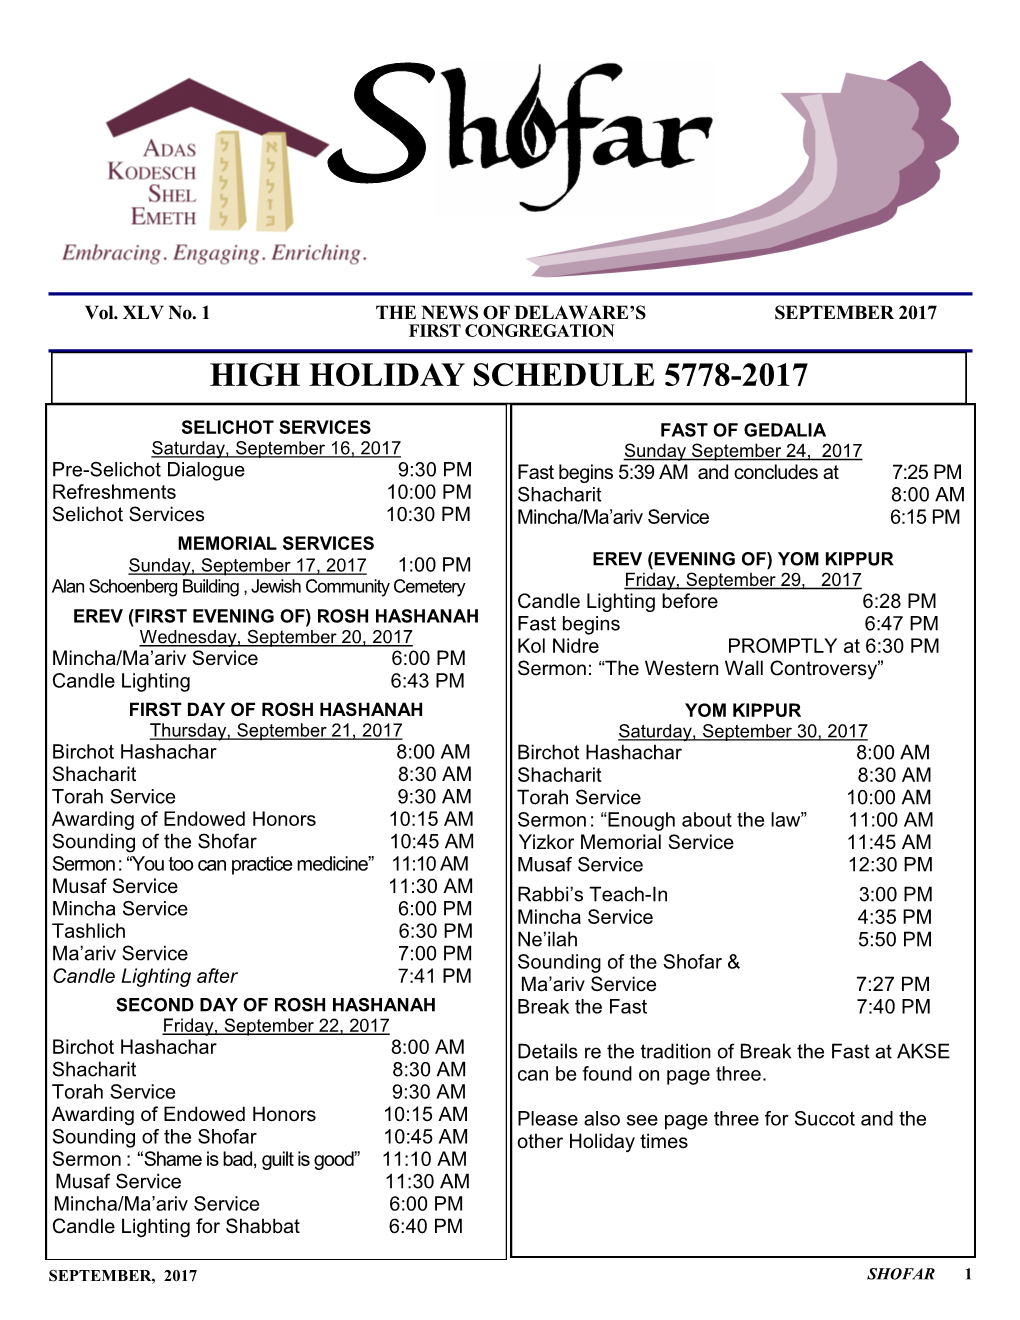 High Holiday Schedule 5778-2017